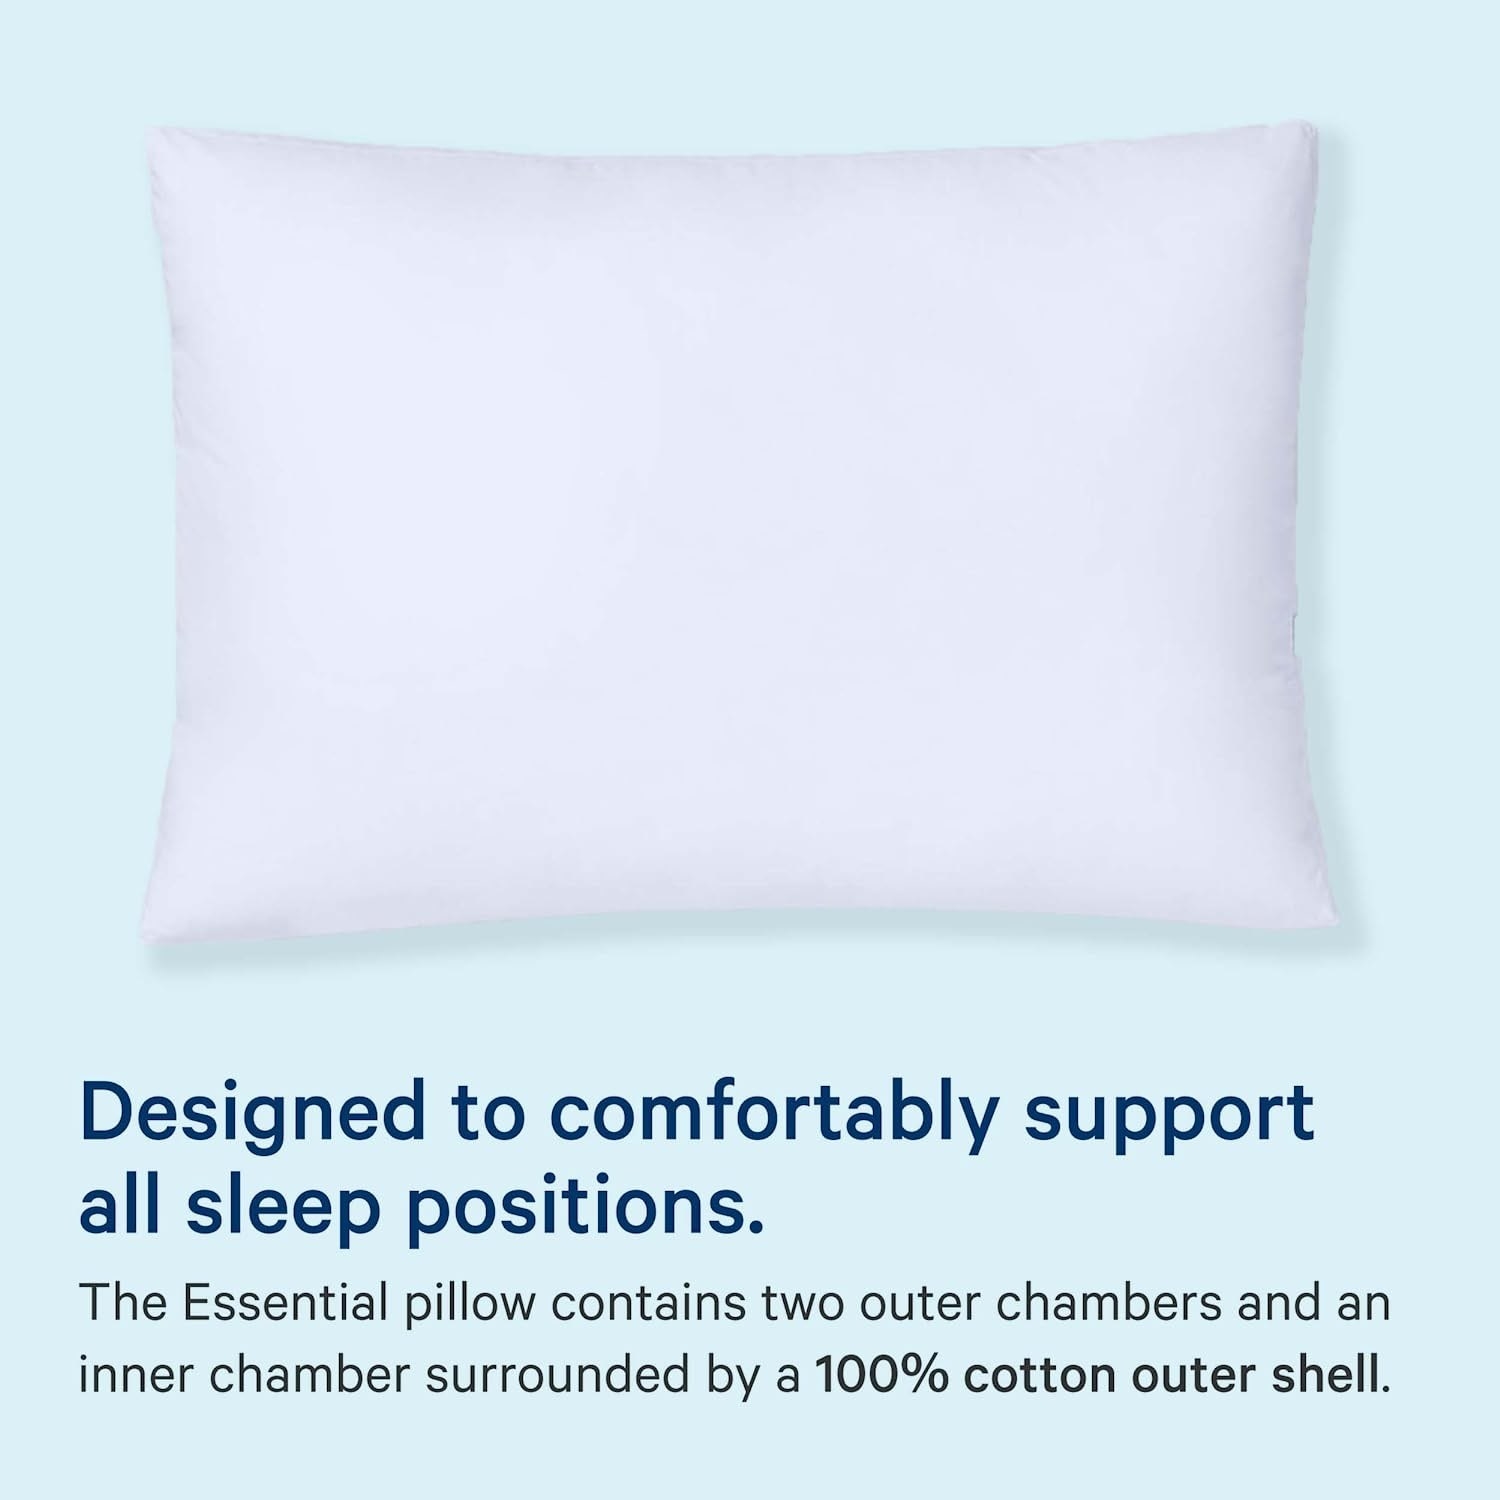 The pillow, which is designed to comfortably support all sleep positions